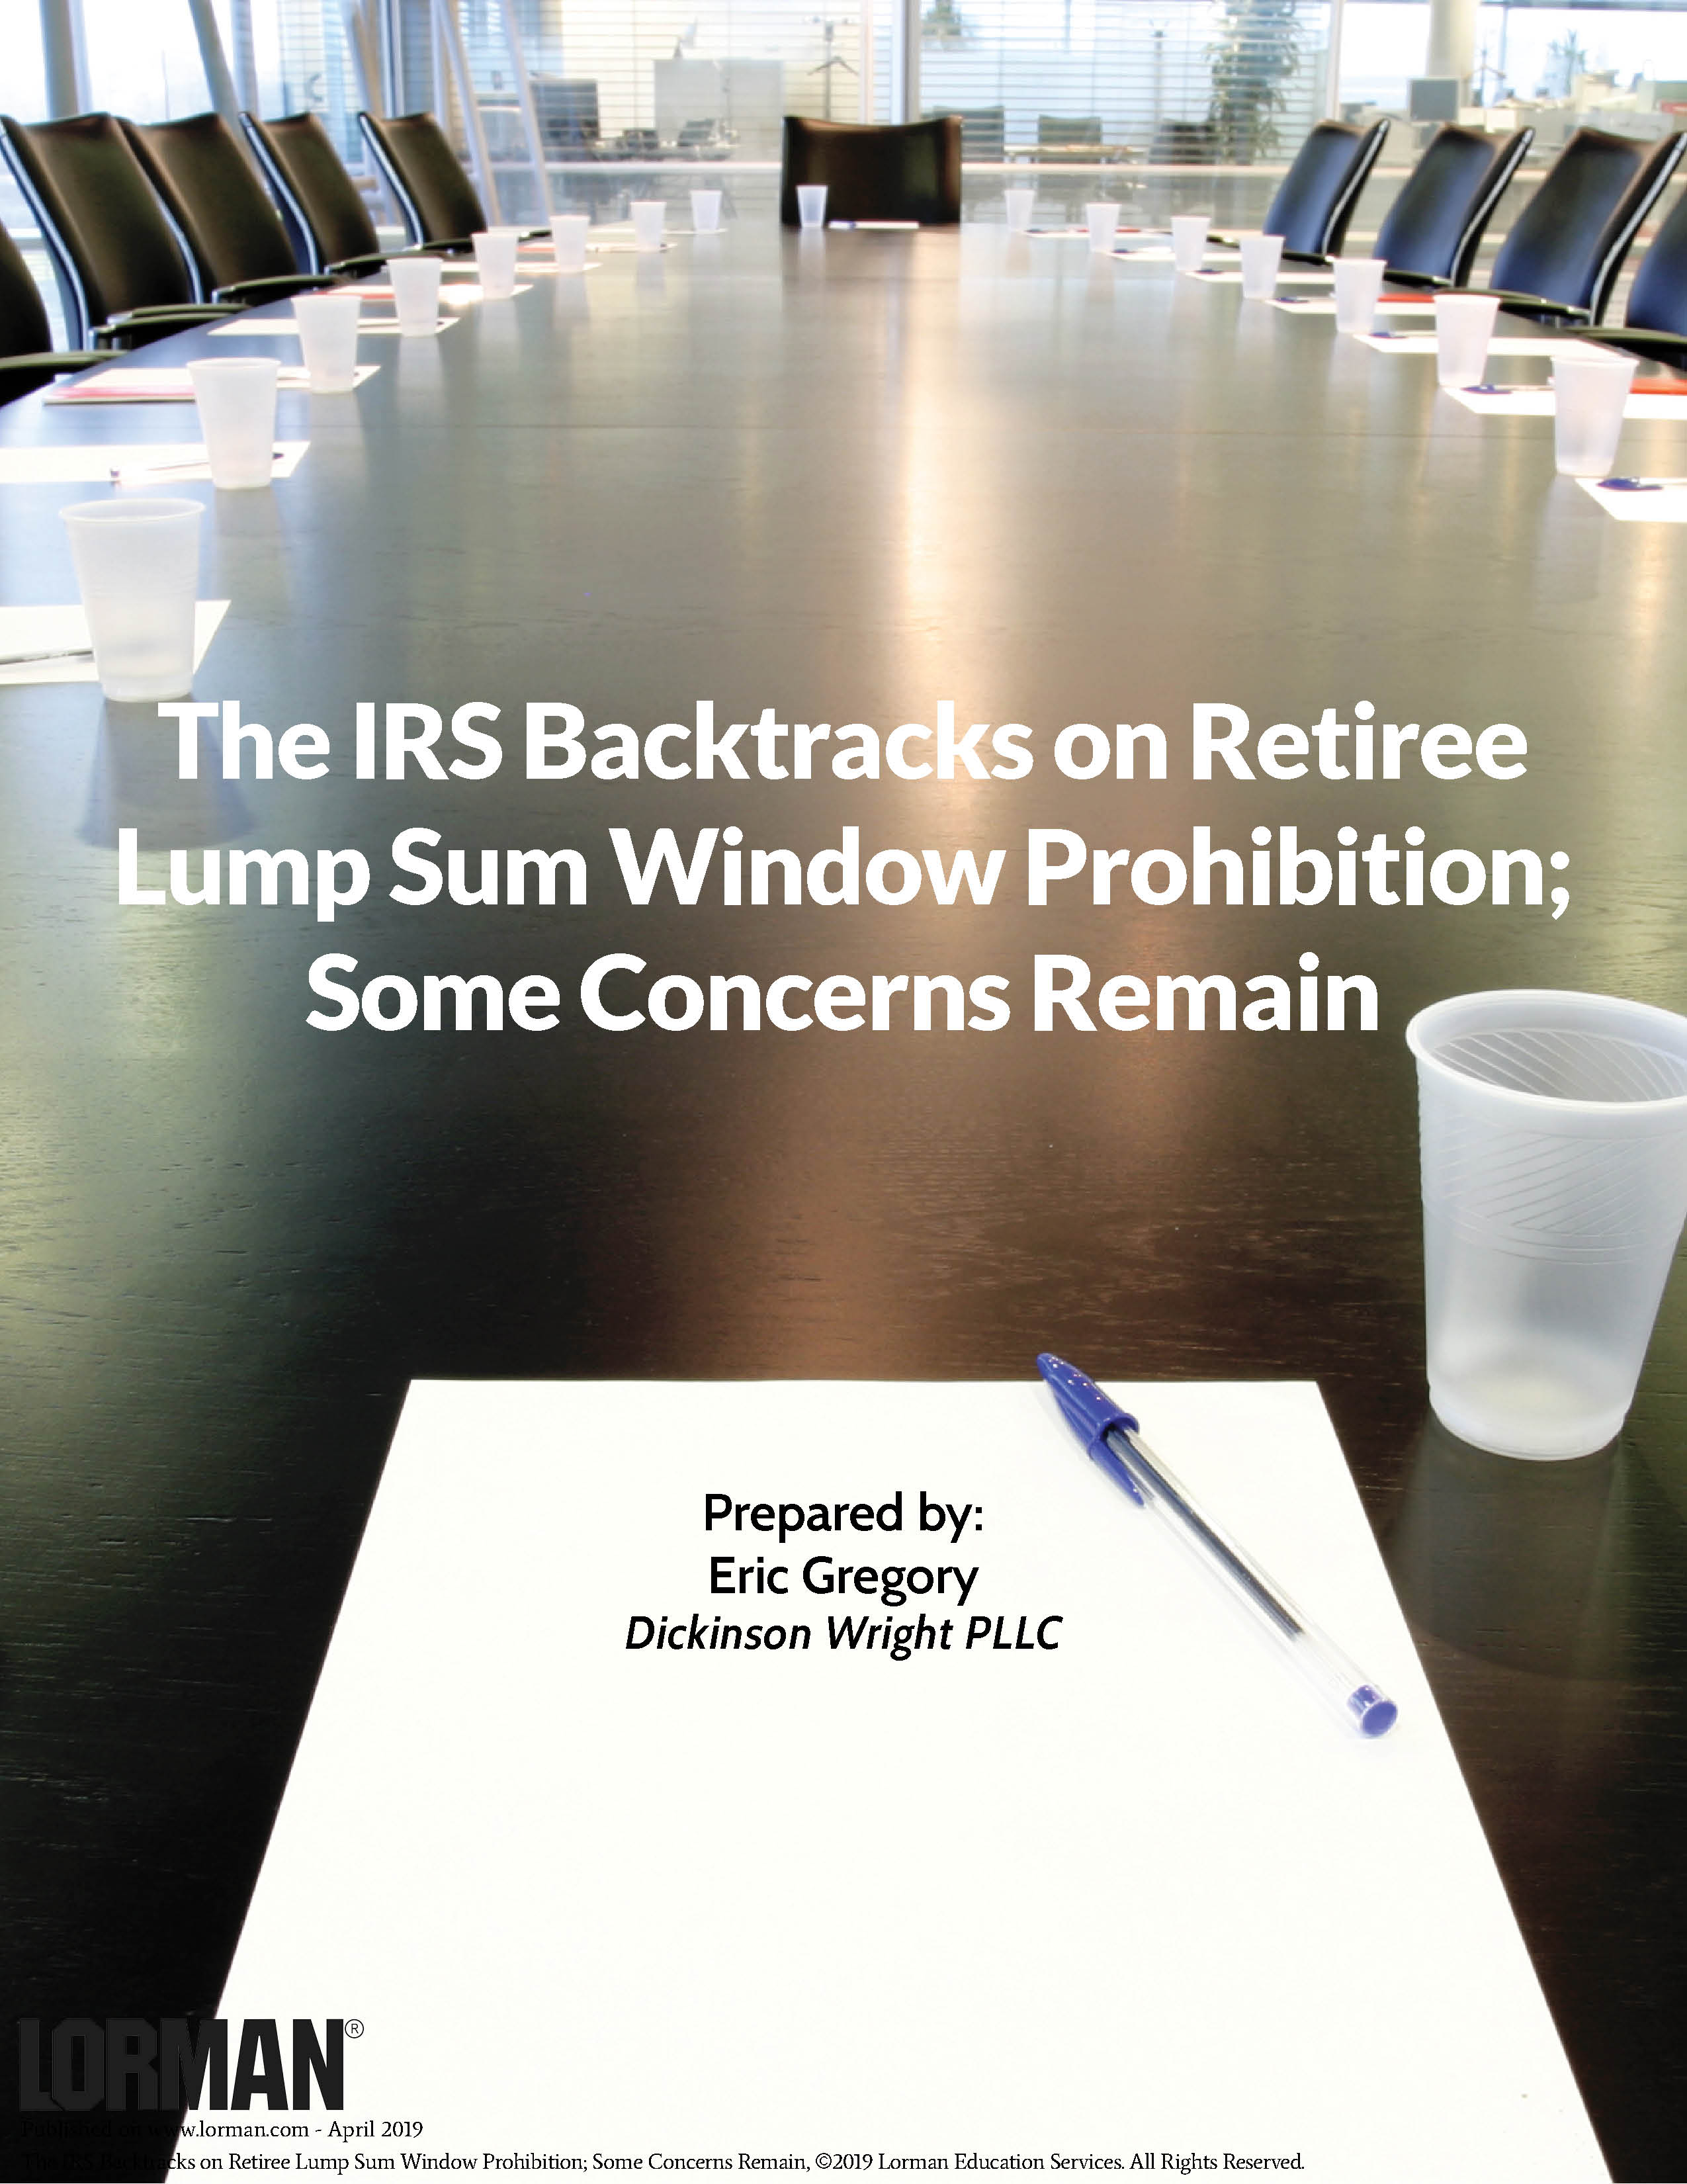 The IRS Backtracks on Retiree Lump Sum Window Prohibition; Some Concerns Remain